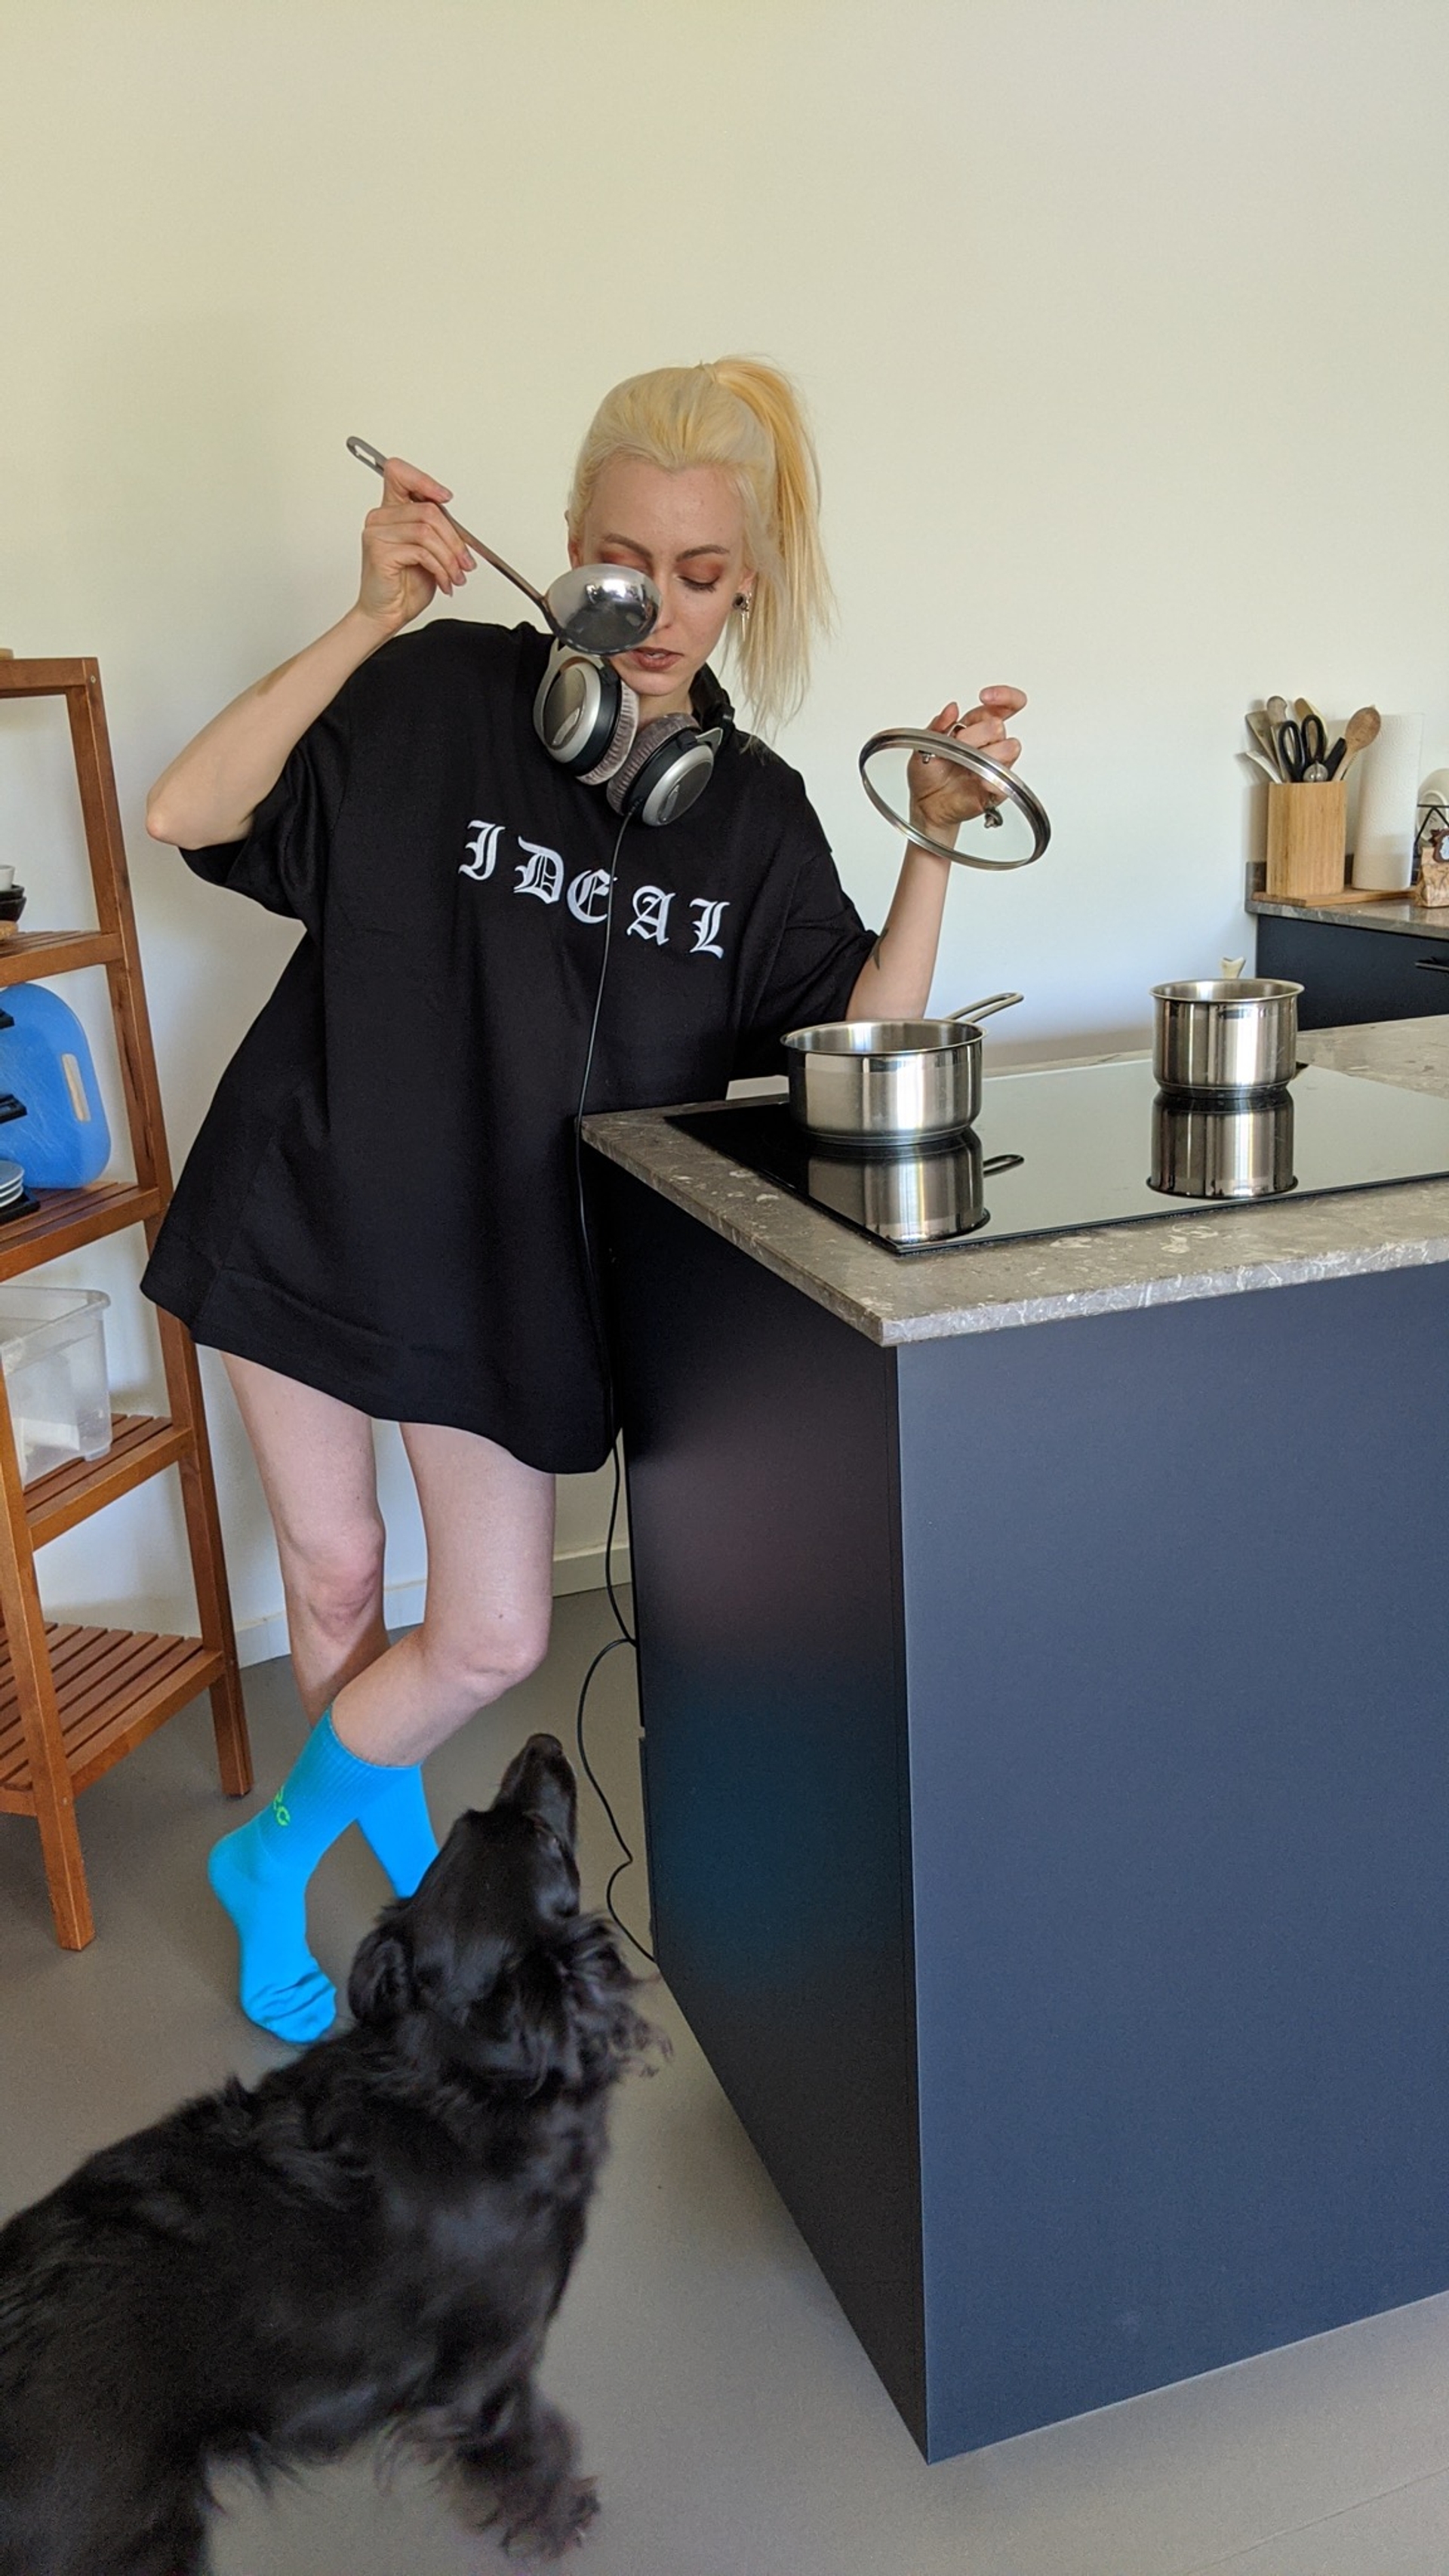 Greta wears the 032c LoveSexDreams "Ideal" t-shirt in black and "My Life My Rules" socks in blue. Tina is jealous.